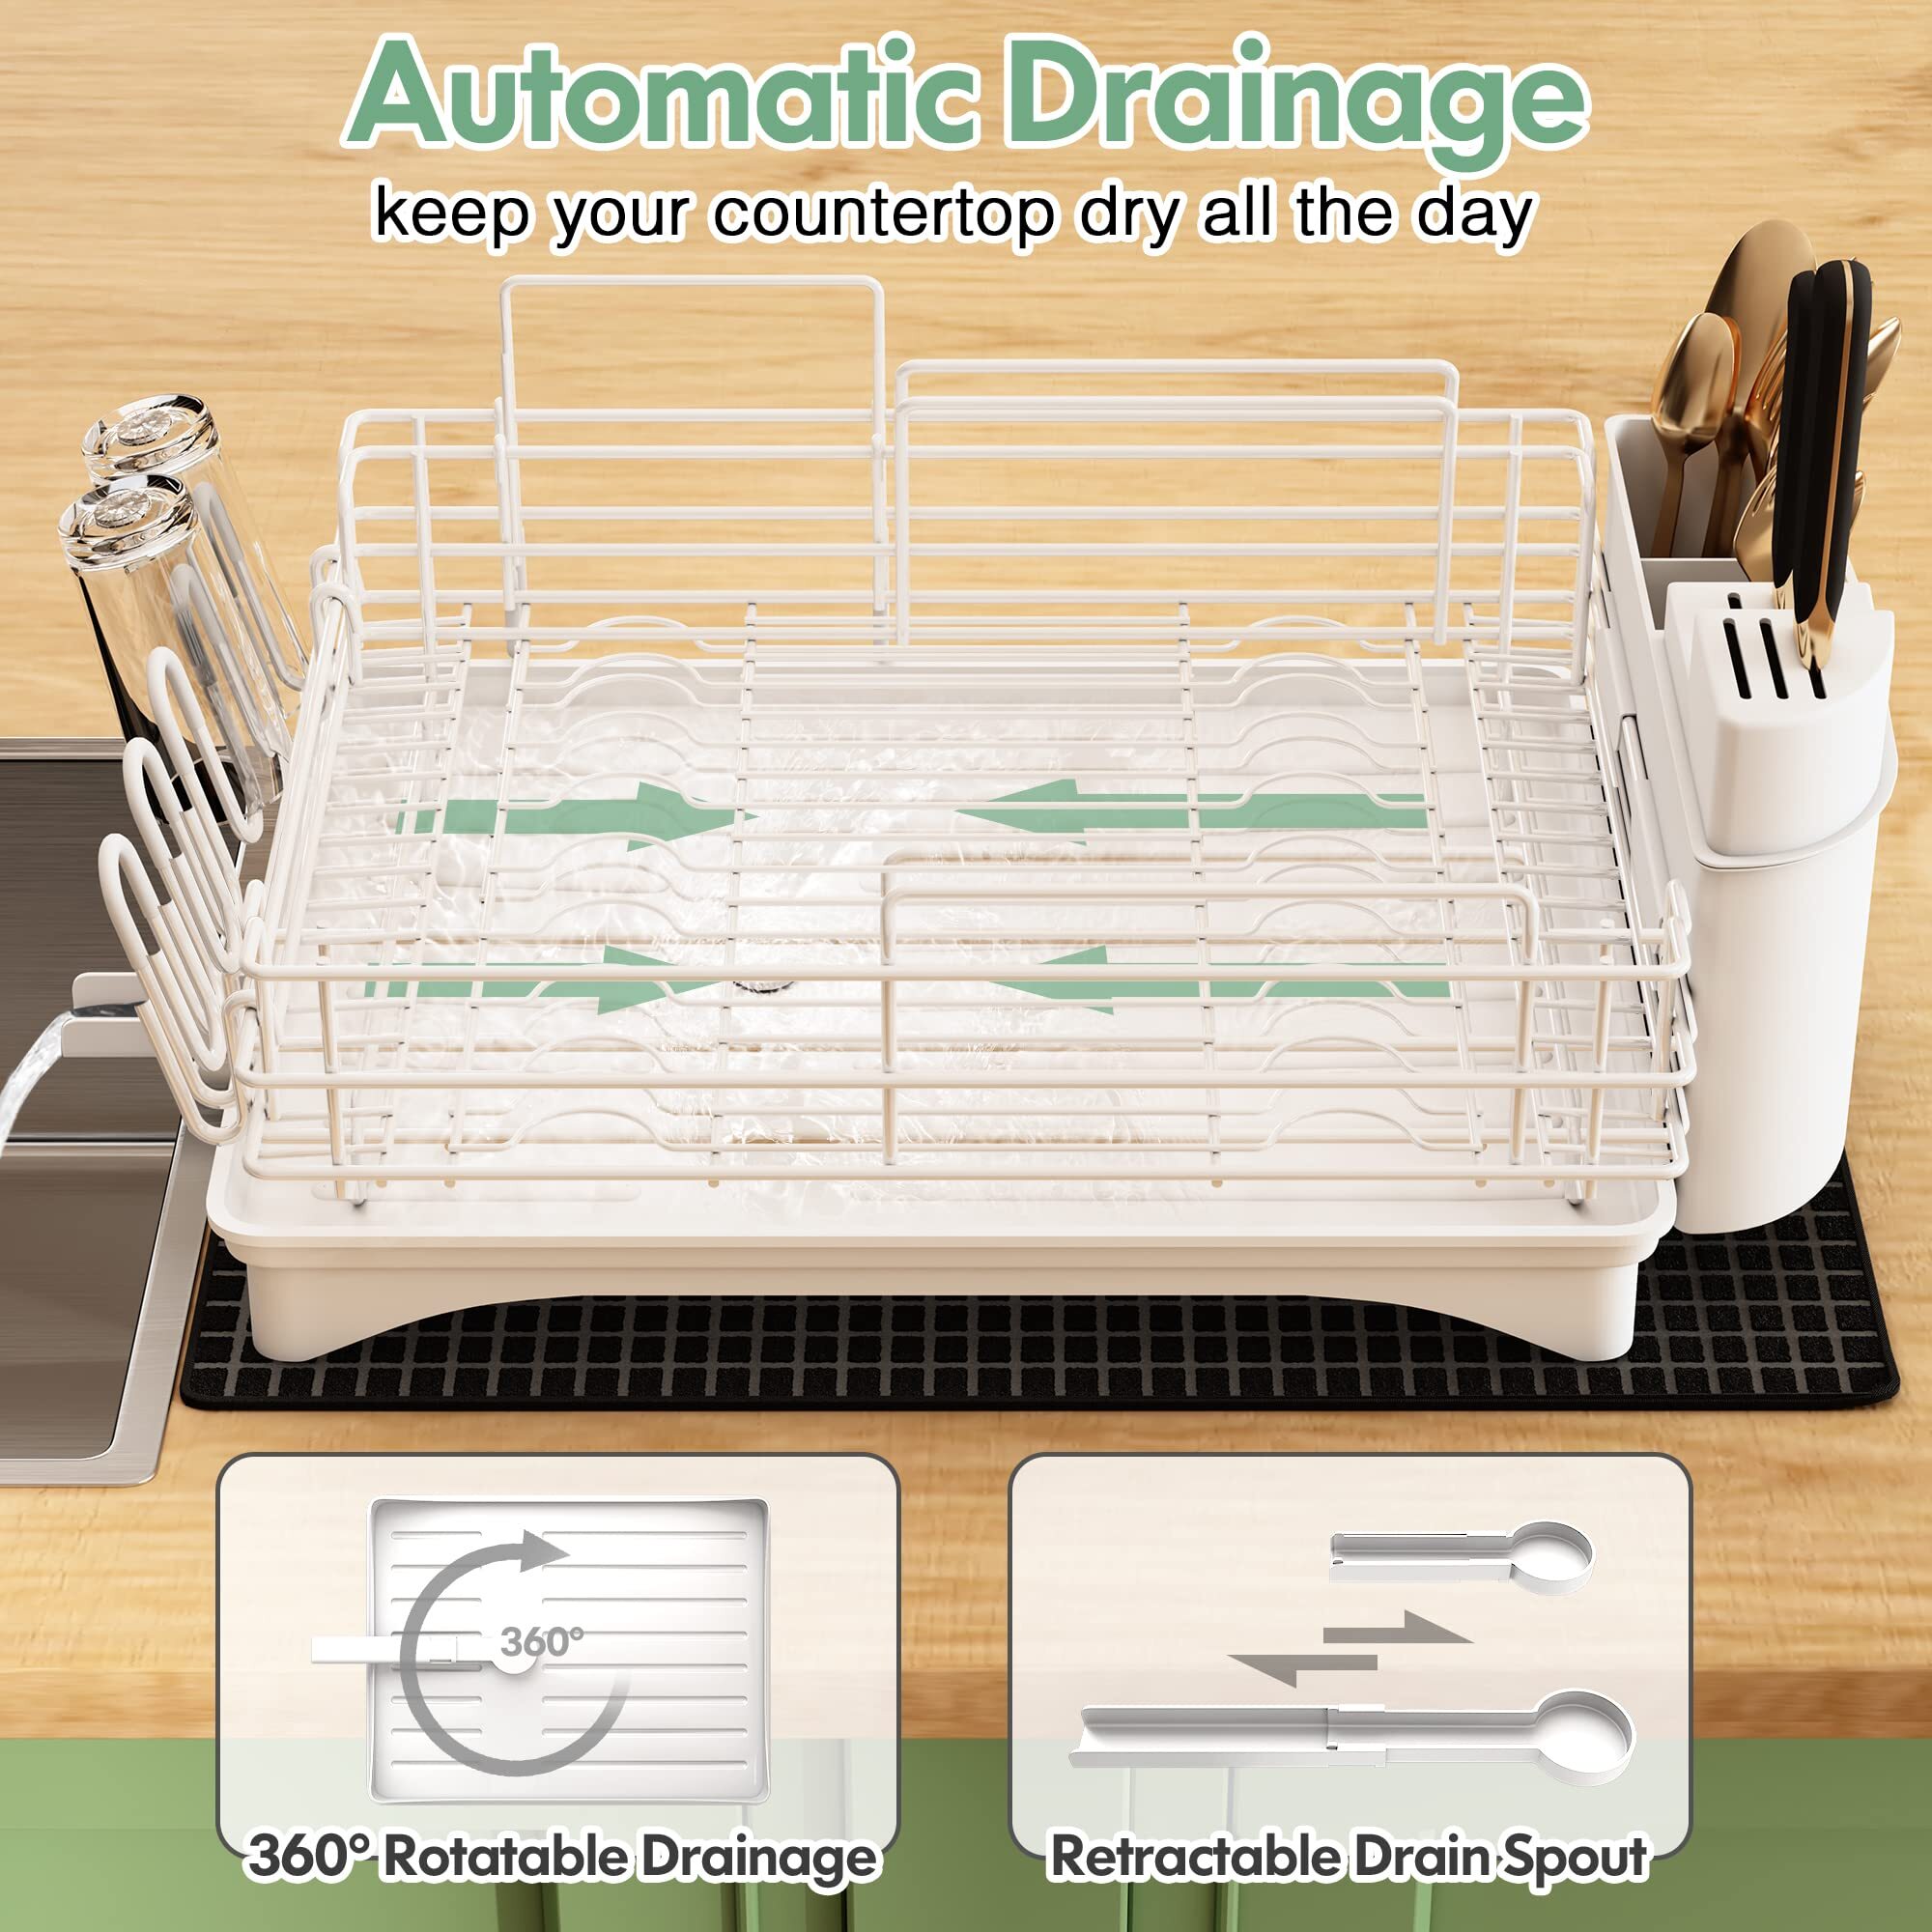 Dish Drying Rack- Space-Saving Dish Rack, Dish Racks for Kitchen Counter, Durable Stainless Steel Kitchen Drying Rack with a Cutlery Holder, Drying Rack for Dishes, Knives, Spoons, and Forks